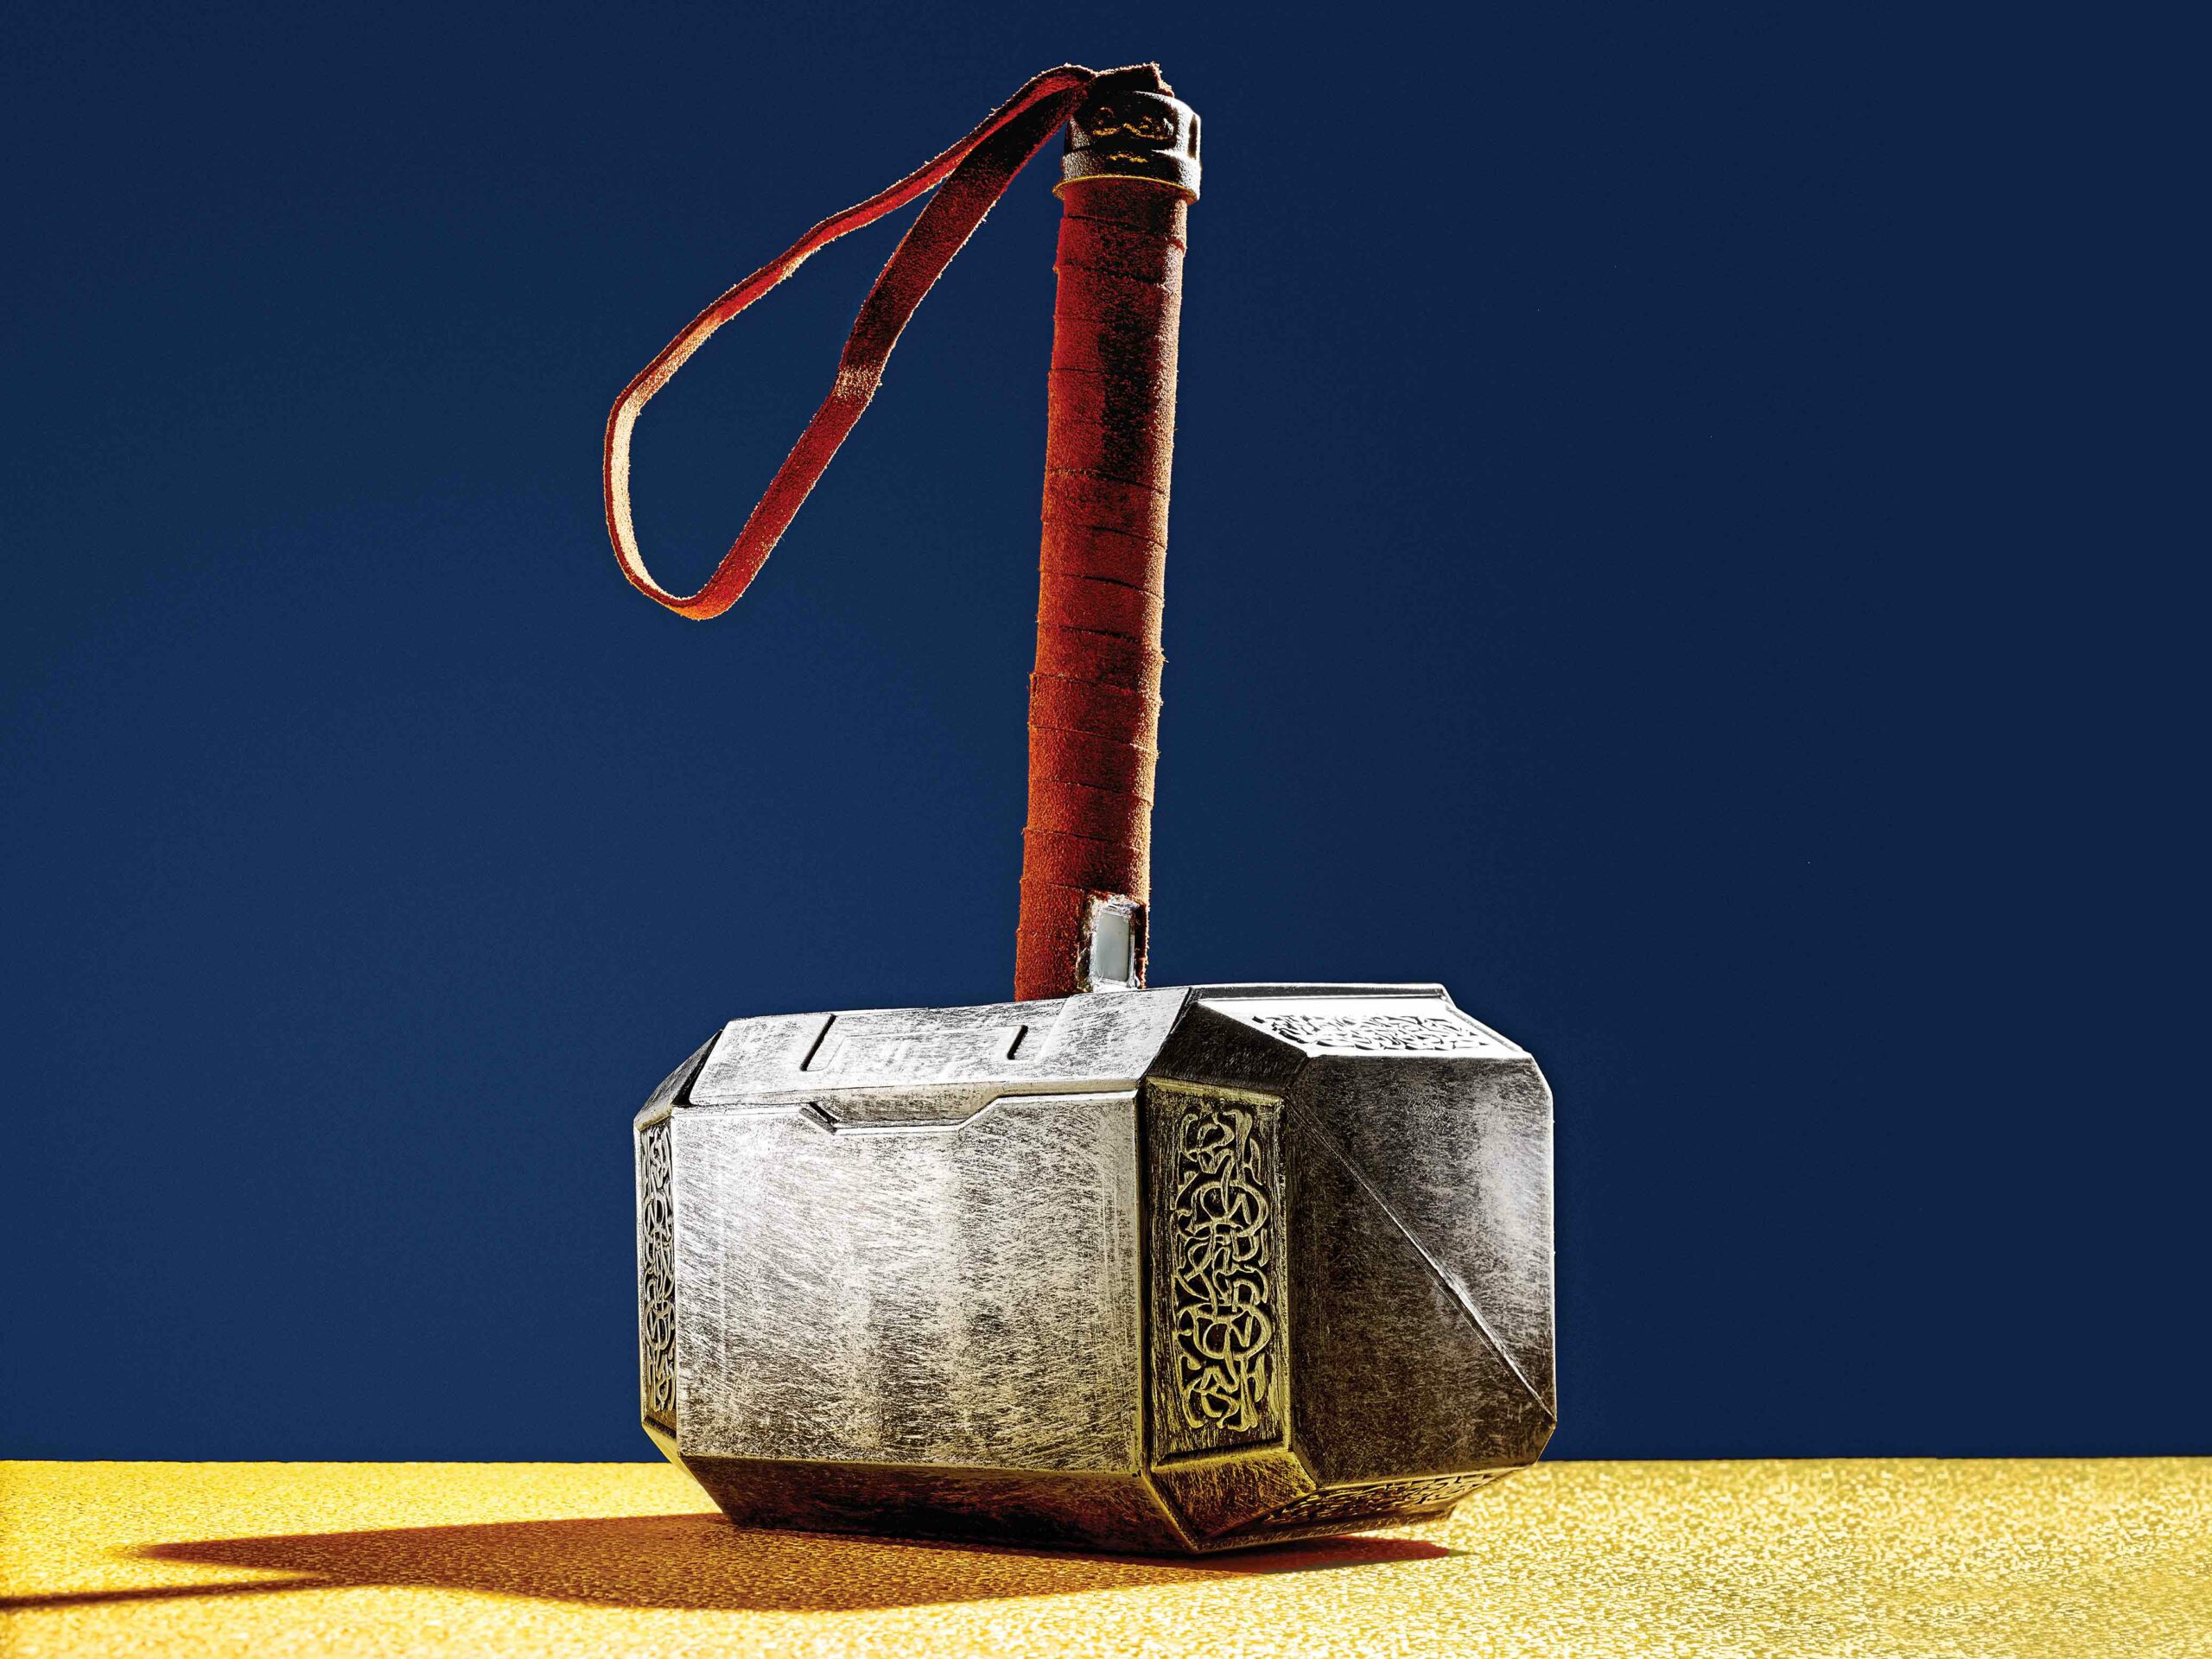 12 Things You Need To Know About Thor's Hammer